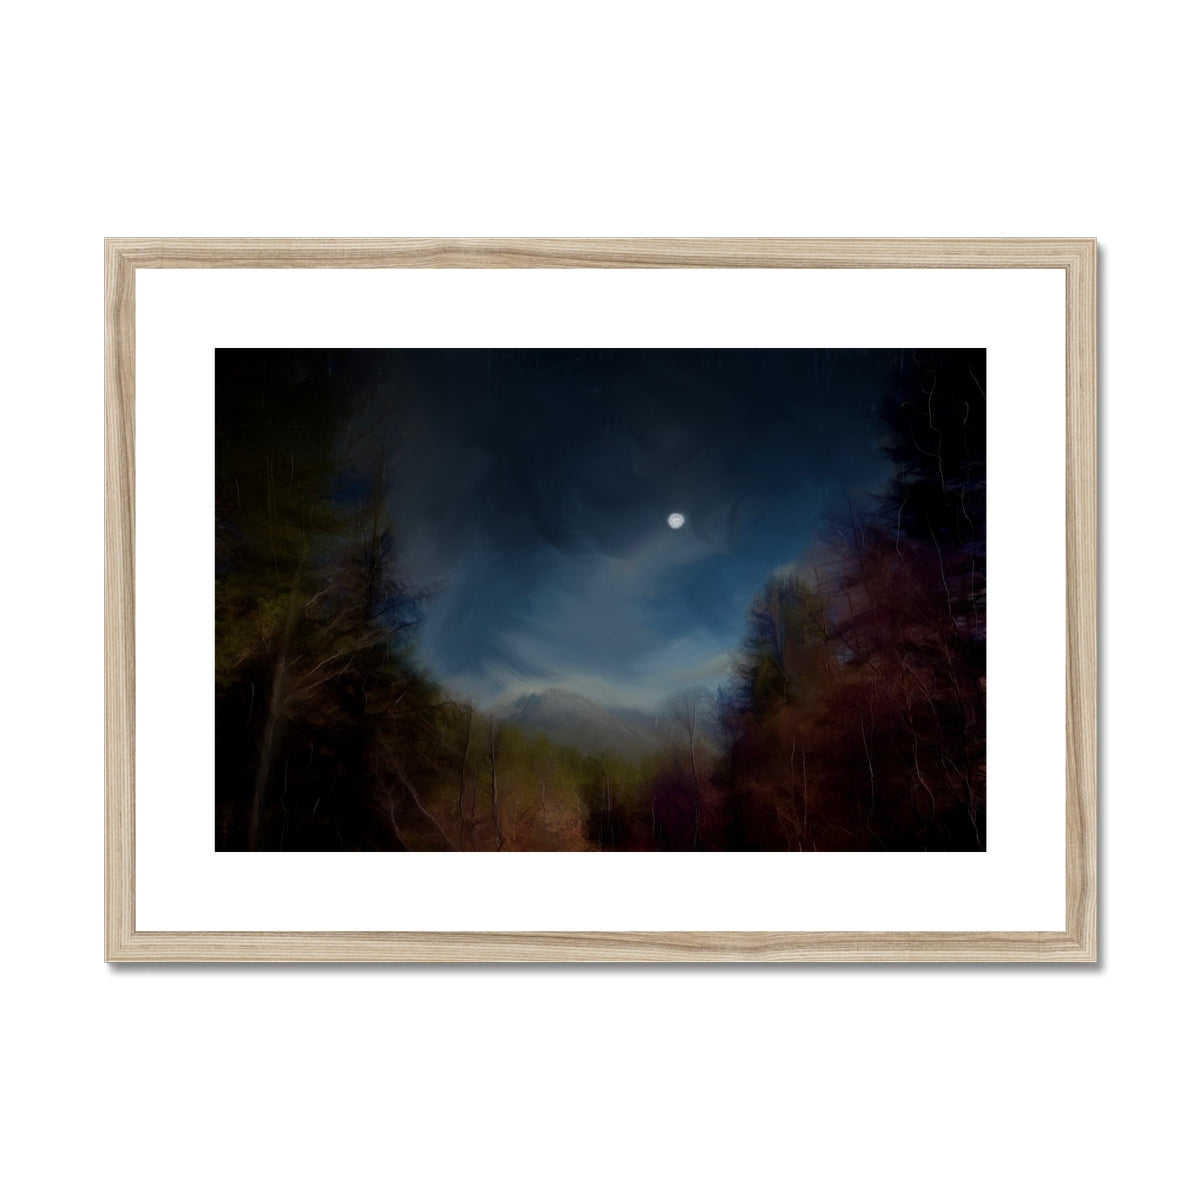 Glencoe Lochan Moonlight Painting | Framed & Mounted Prints From Scotland-Framed & Mounted Prints-Scottish Lochs & Mountains Art Gallery-A2 Landscape-Natural Frame-Paintings, Prints, Homeware, Art Gifts From Scotland By Scottish Artist Kevin Hunter